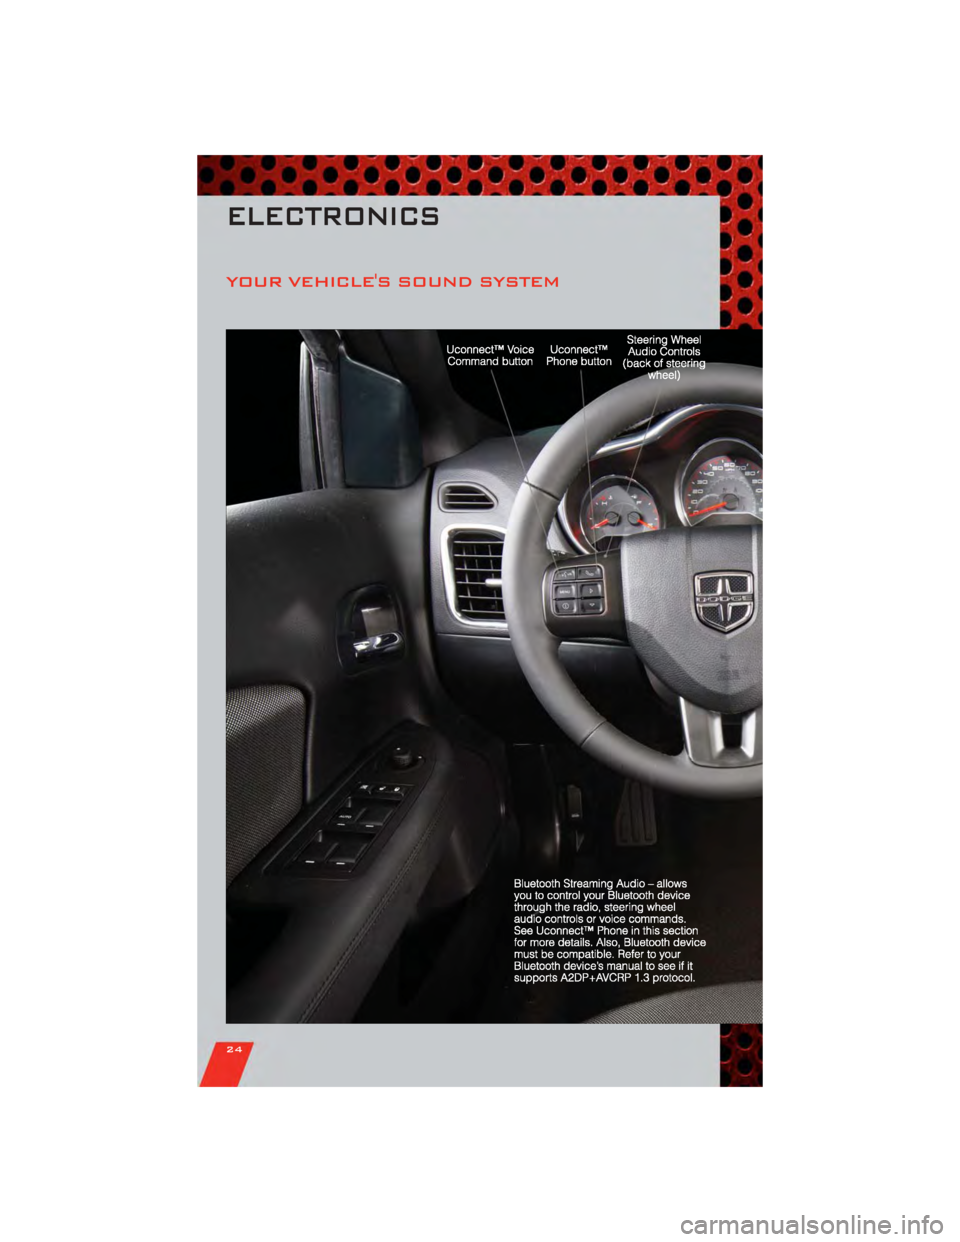 DODGE AVENGER 2011 2.G Owners Manual YOUR VEHICLES SOUND SYSTEM
ELECTRONICS
24 